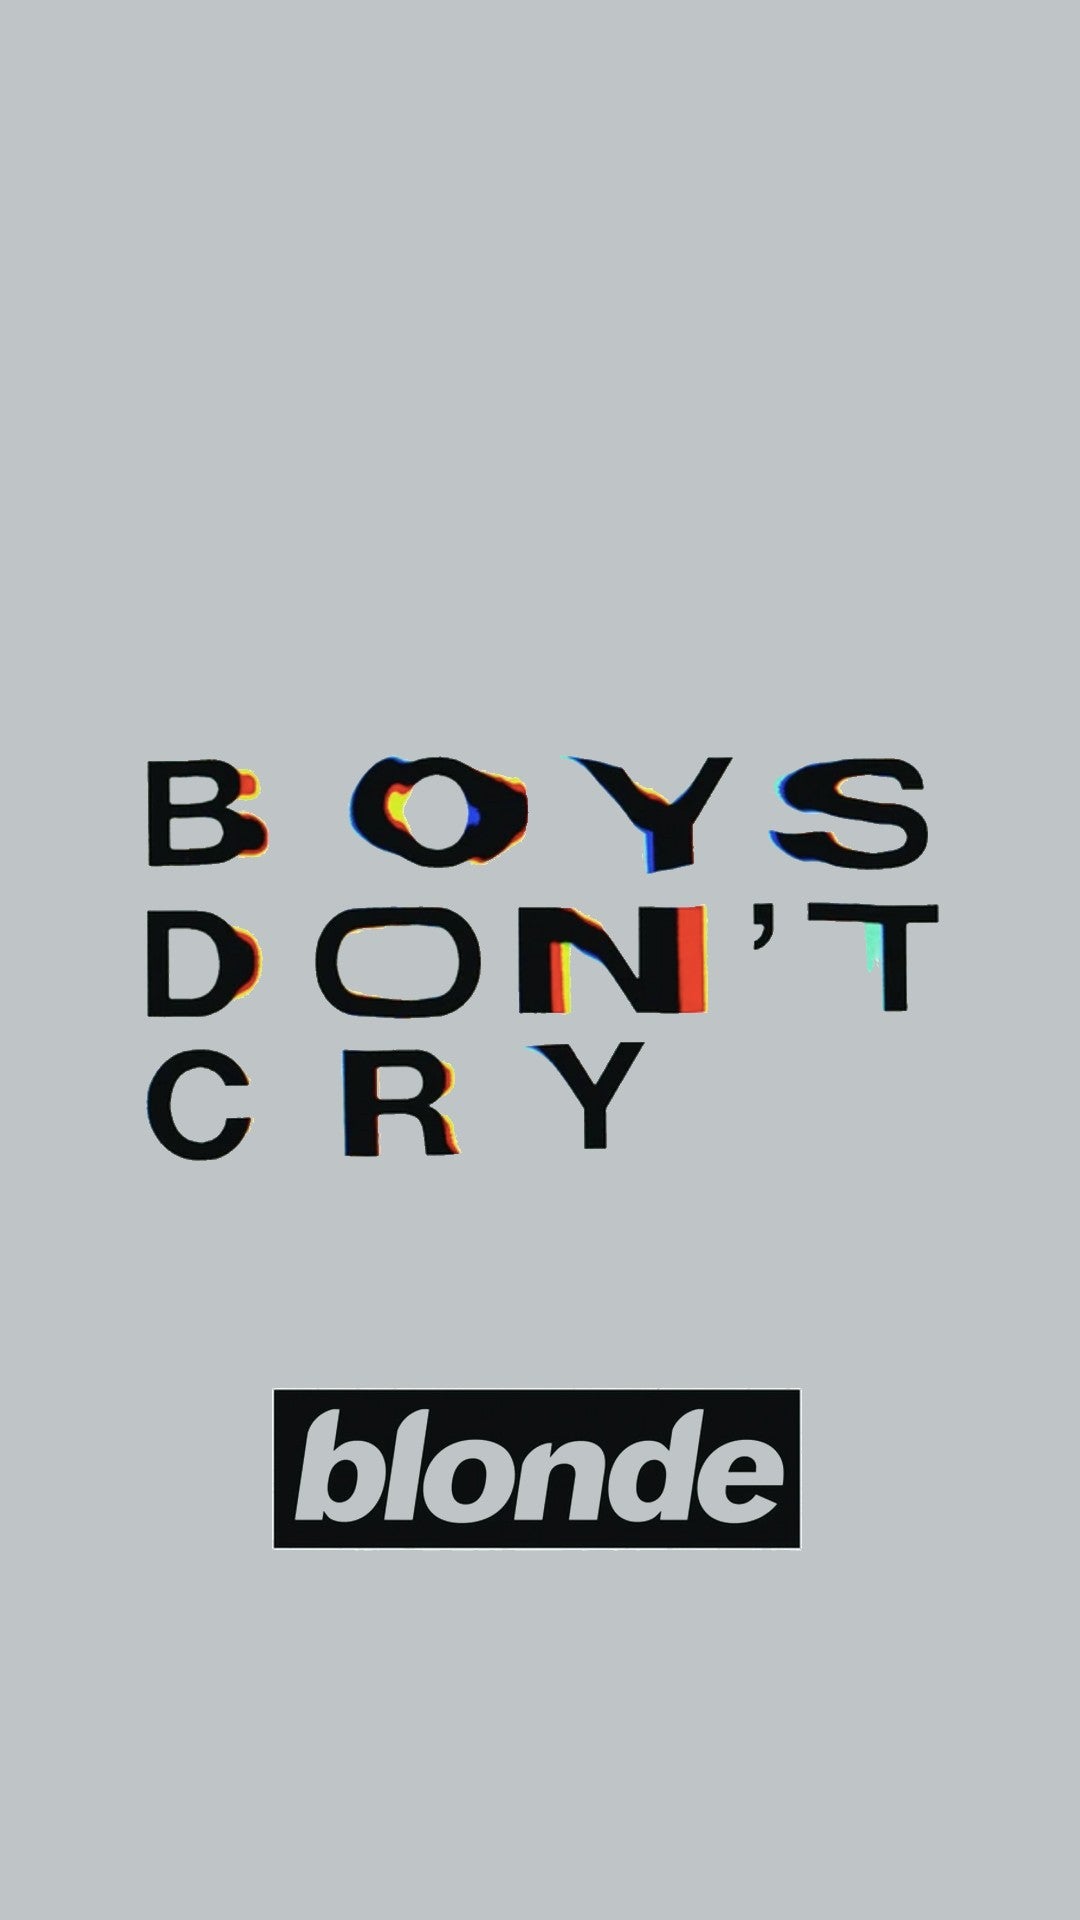 Boys Don't Cry Mobile Wallpaper, i will later do a dark friendly wallpaper